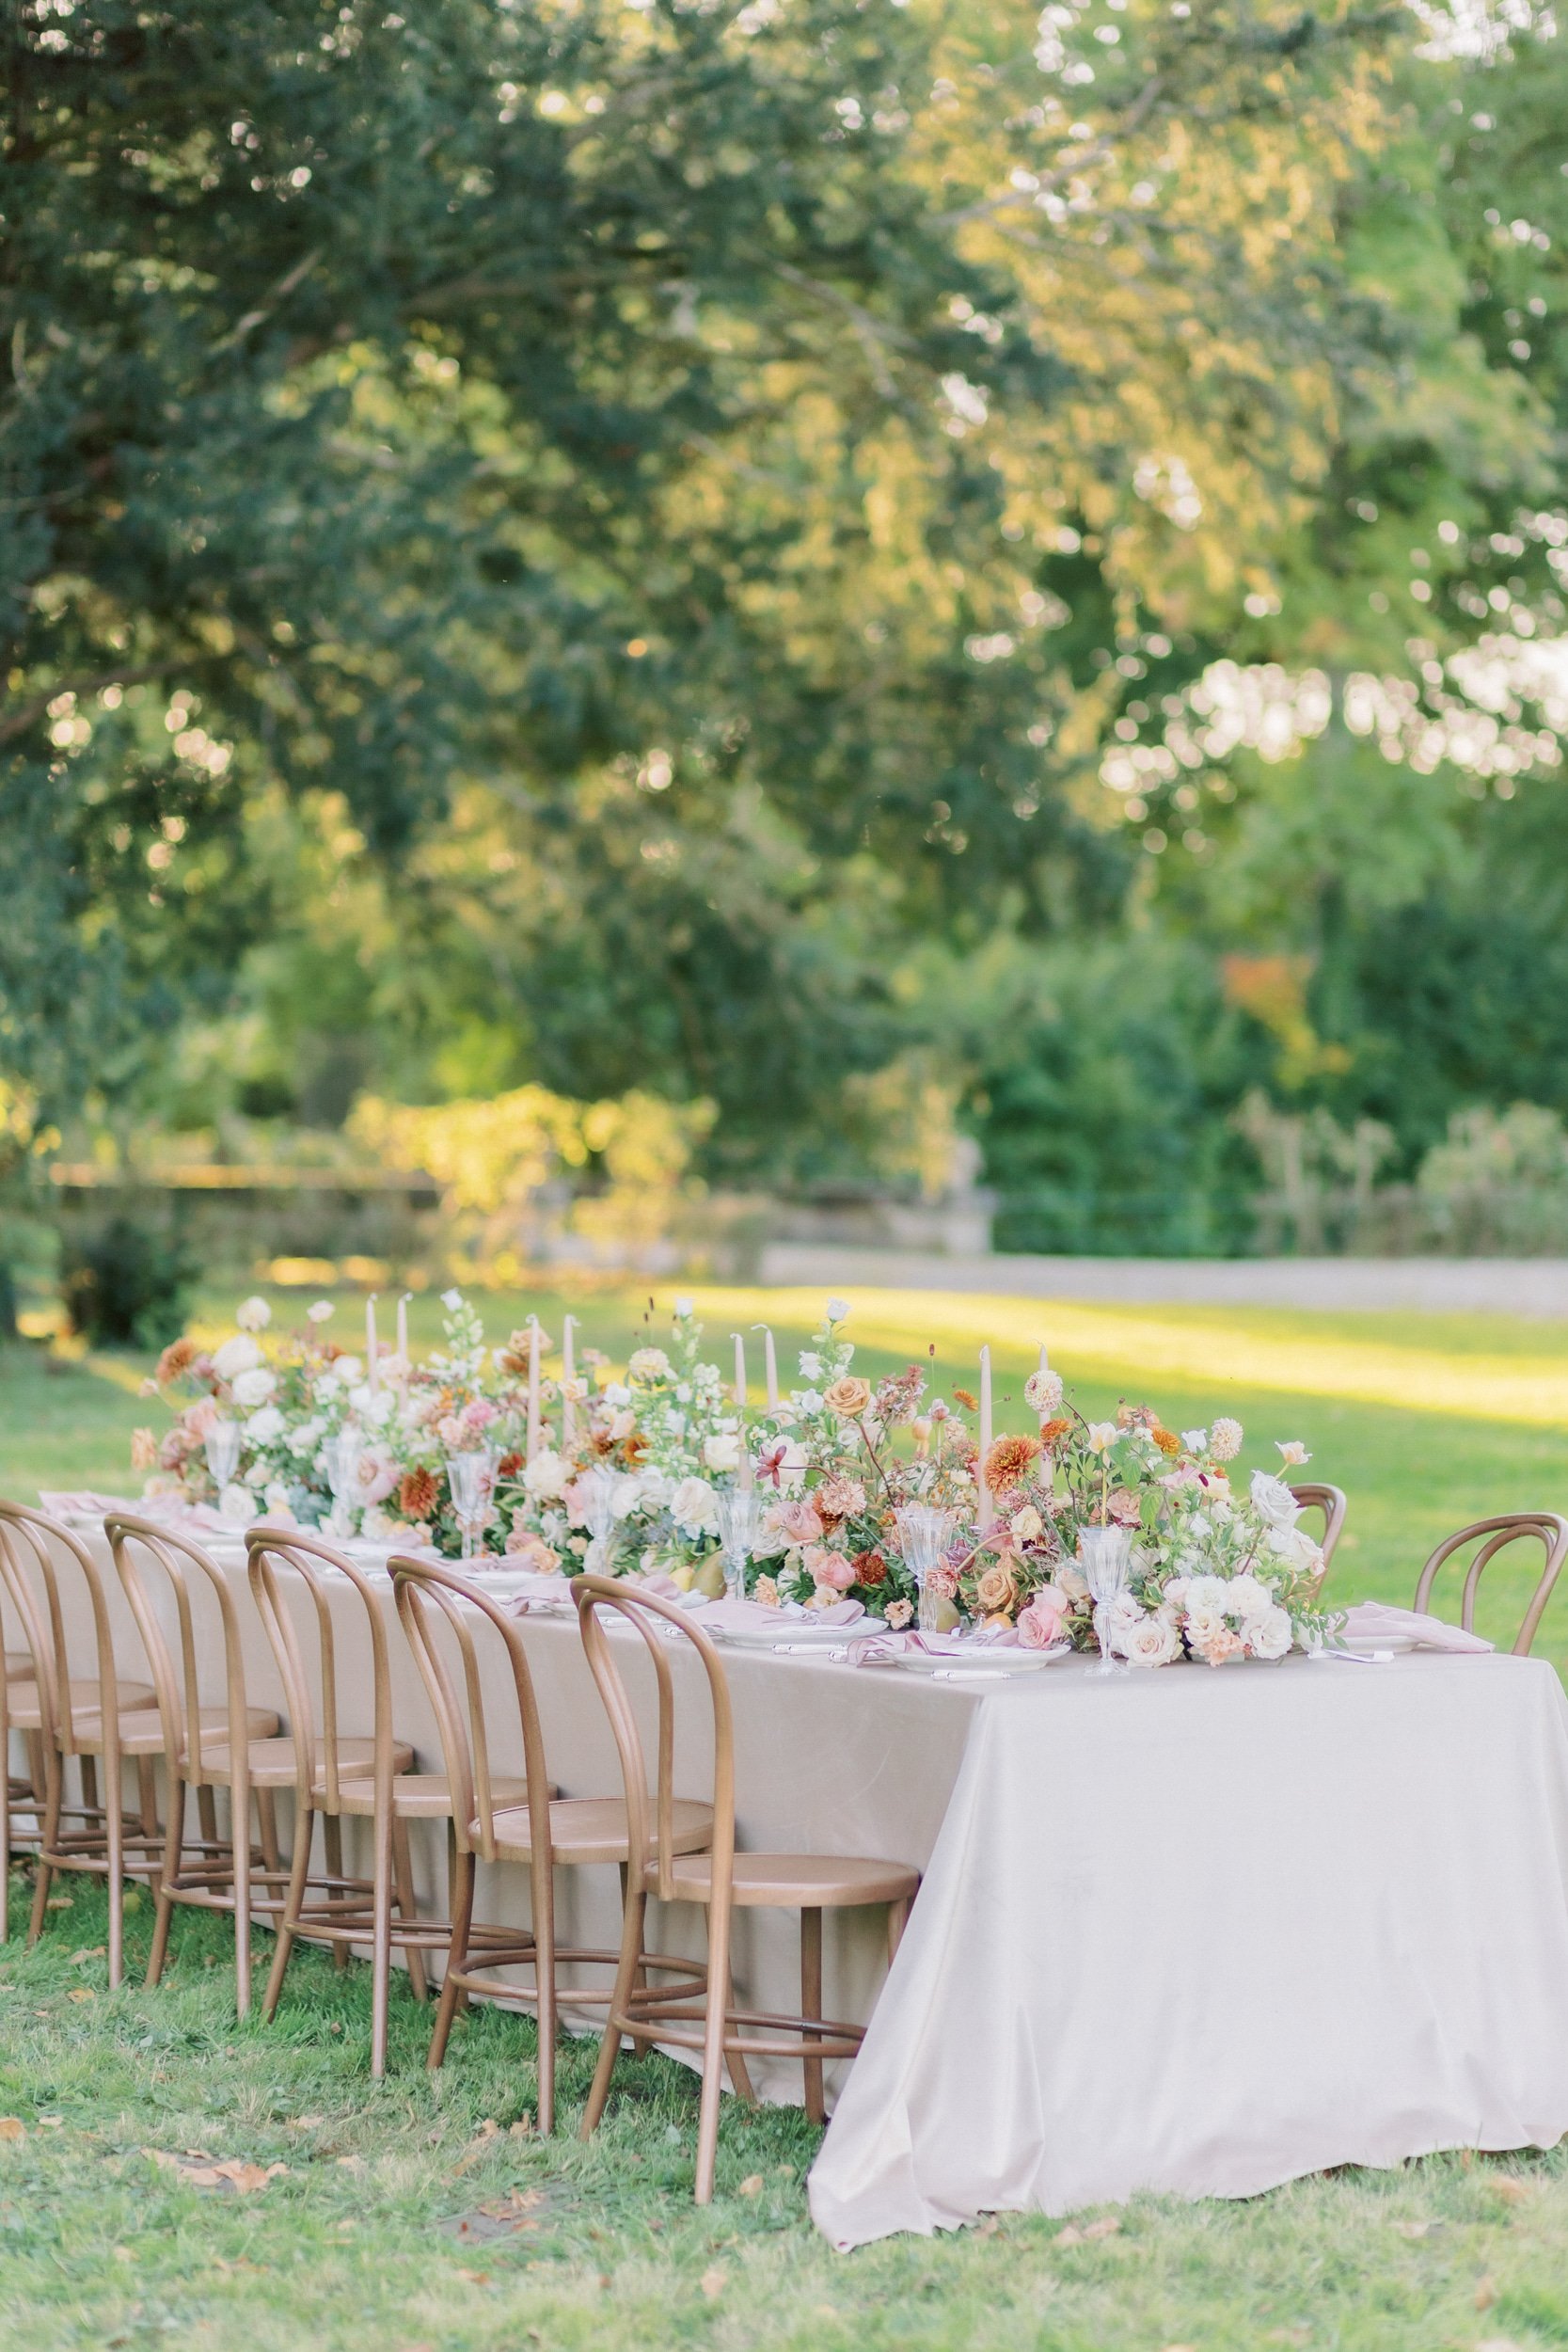 A table set for an alfresco wedding breakfast in the grounds of Chateau de Courtomer, a chateau wedding venue in France.